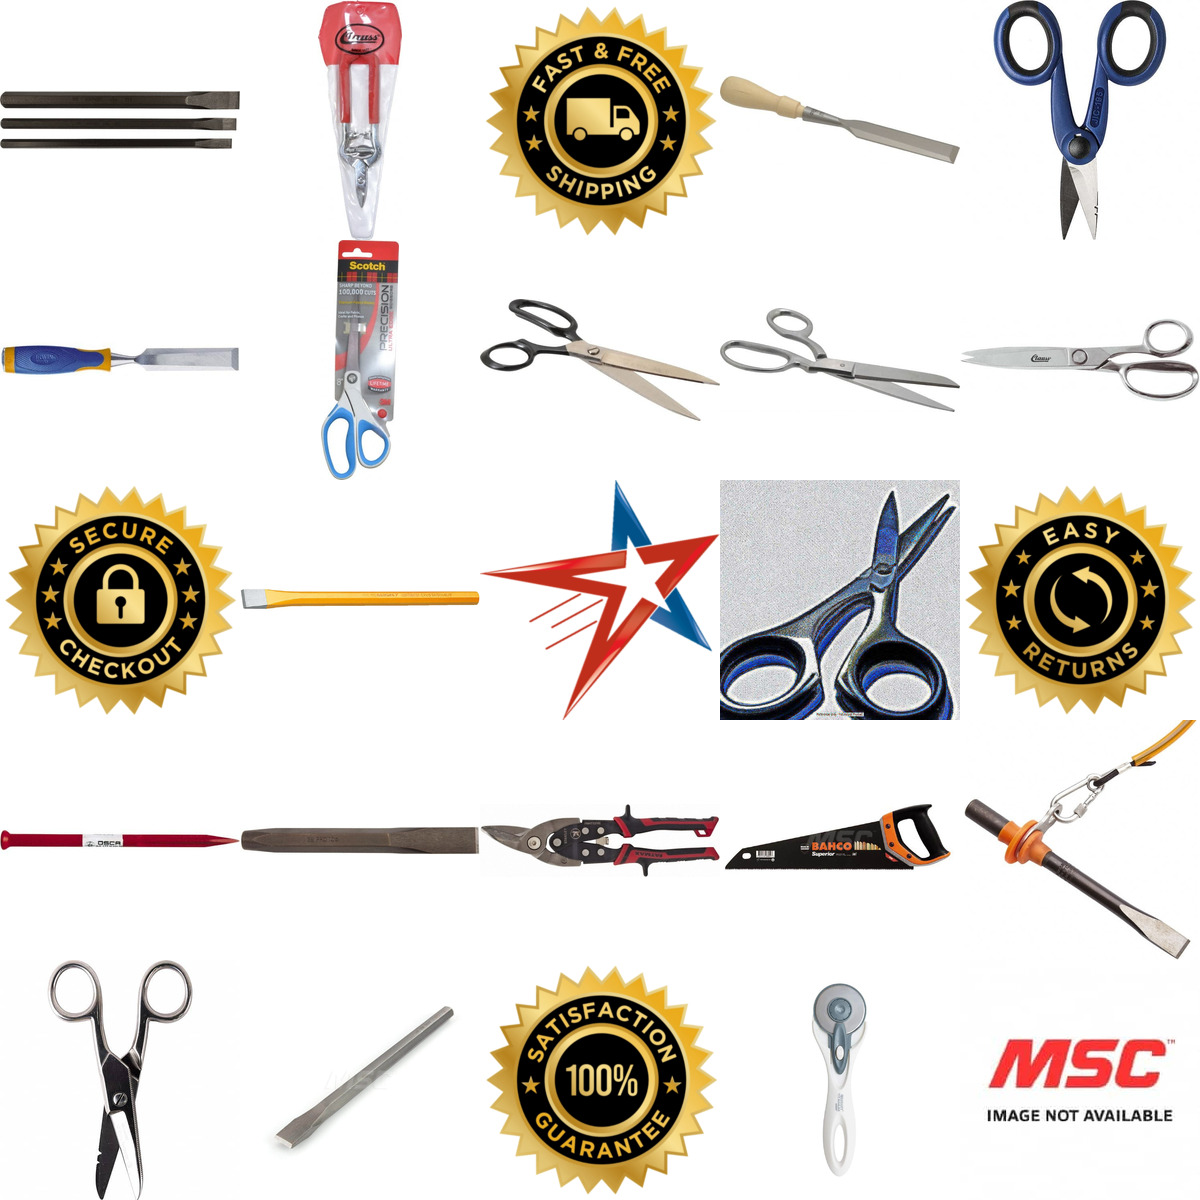 A selection of Saws Chisels and Shears products on GoVets